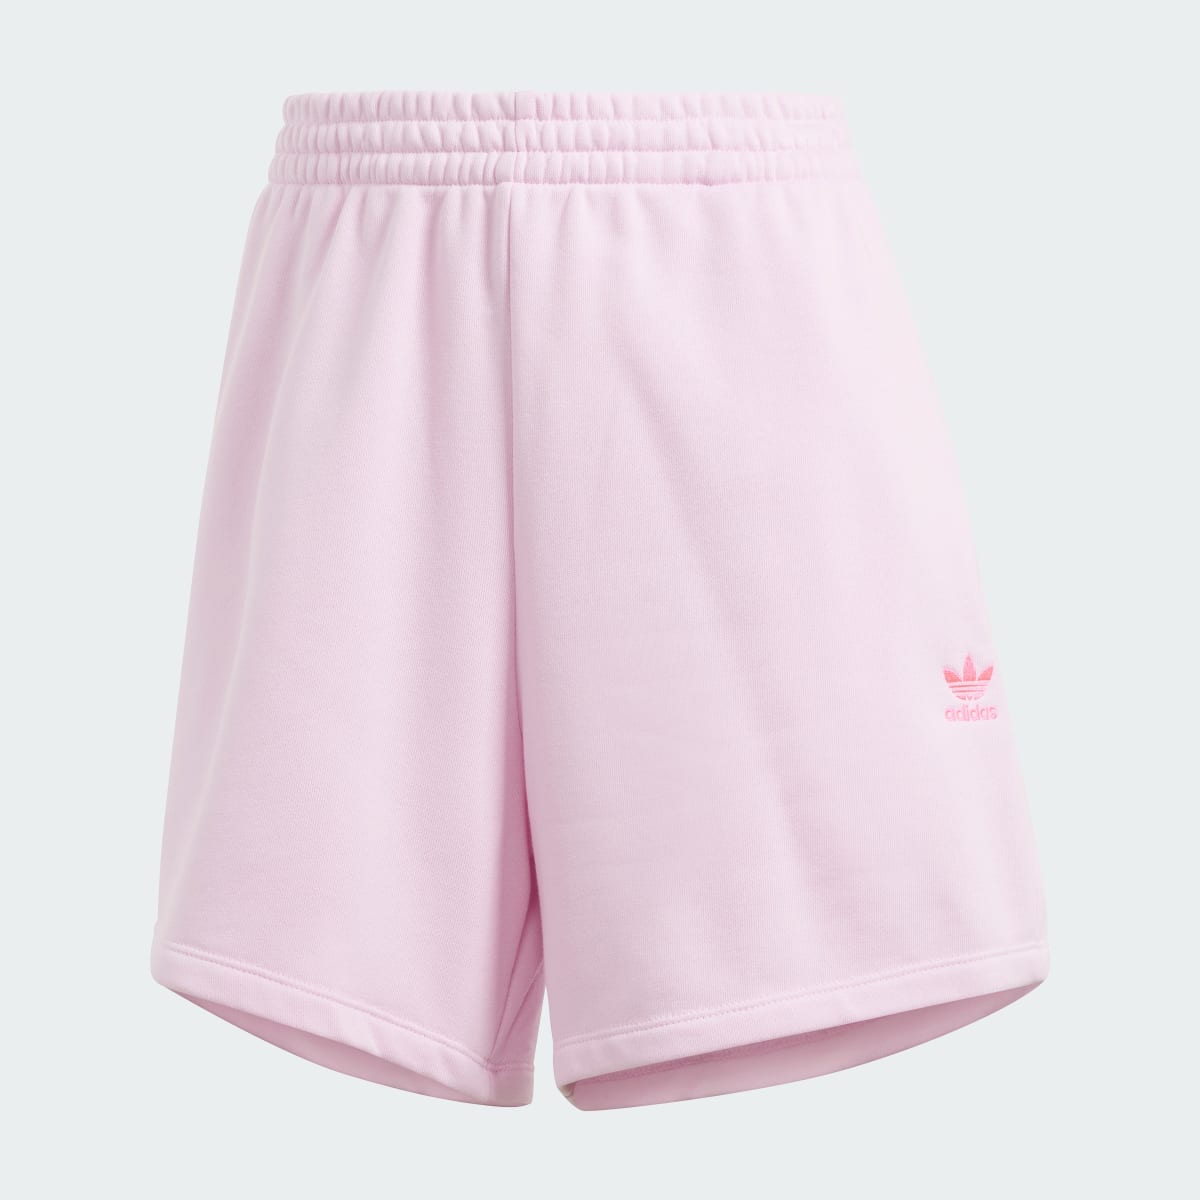 Adidas Adicolor Essentials French Terry Shorts. 4